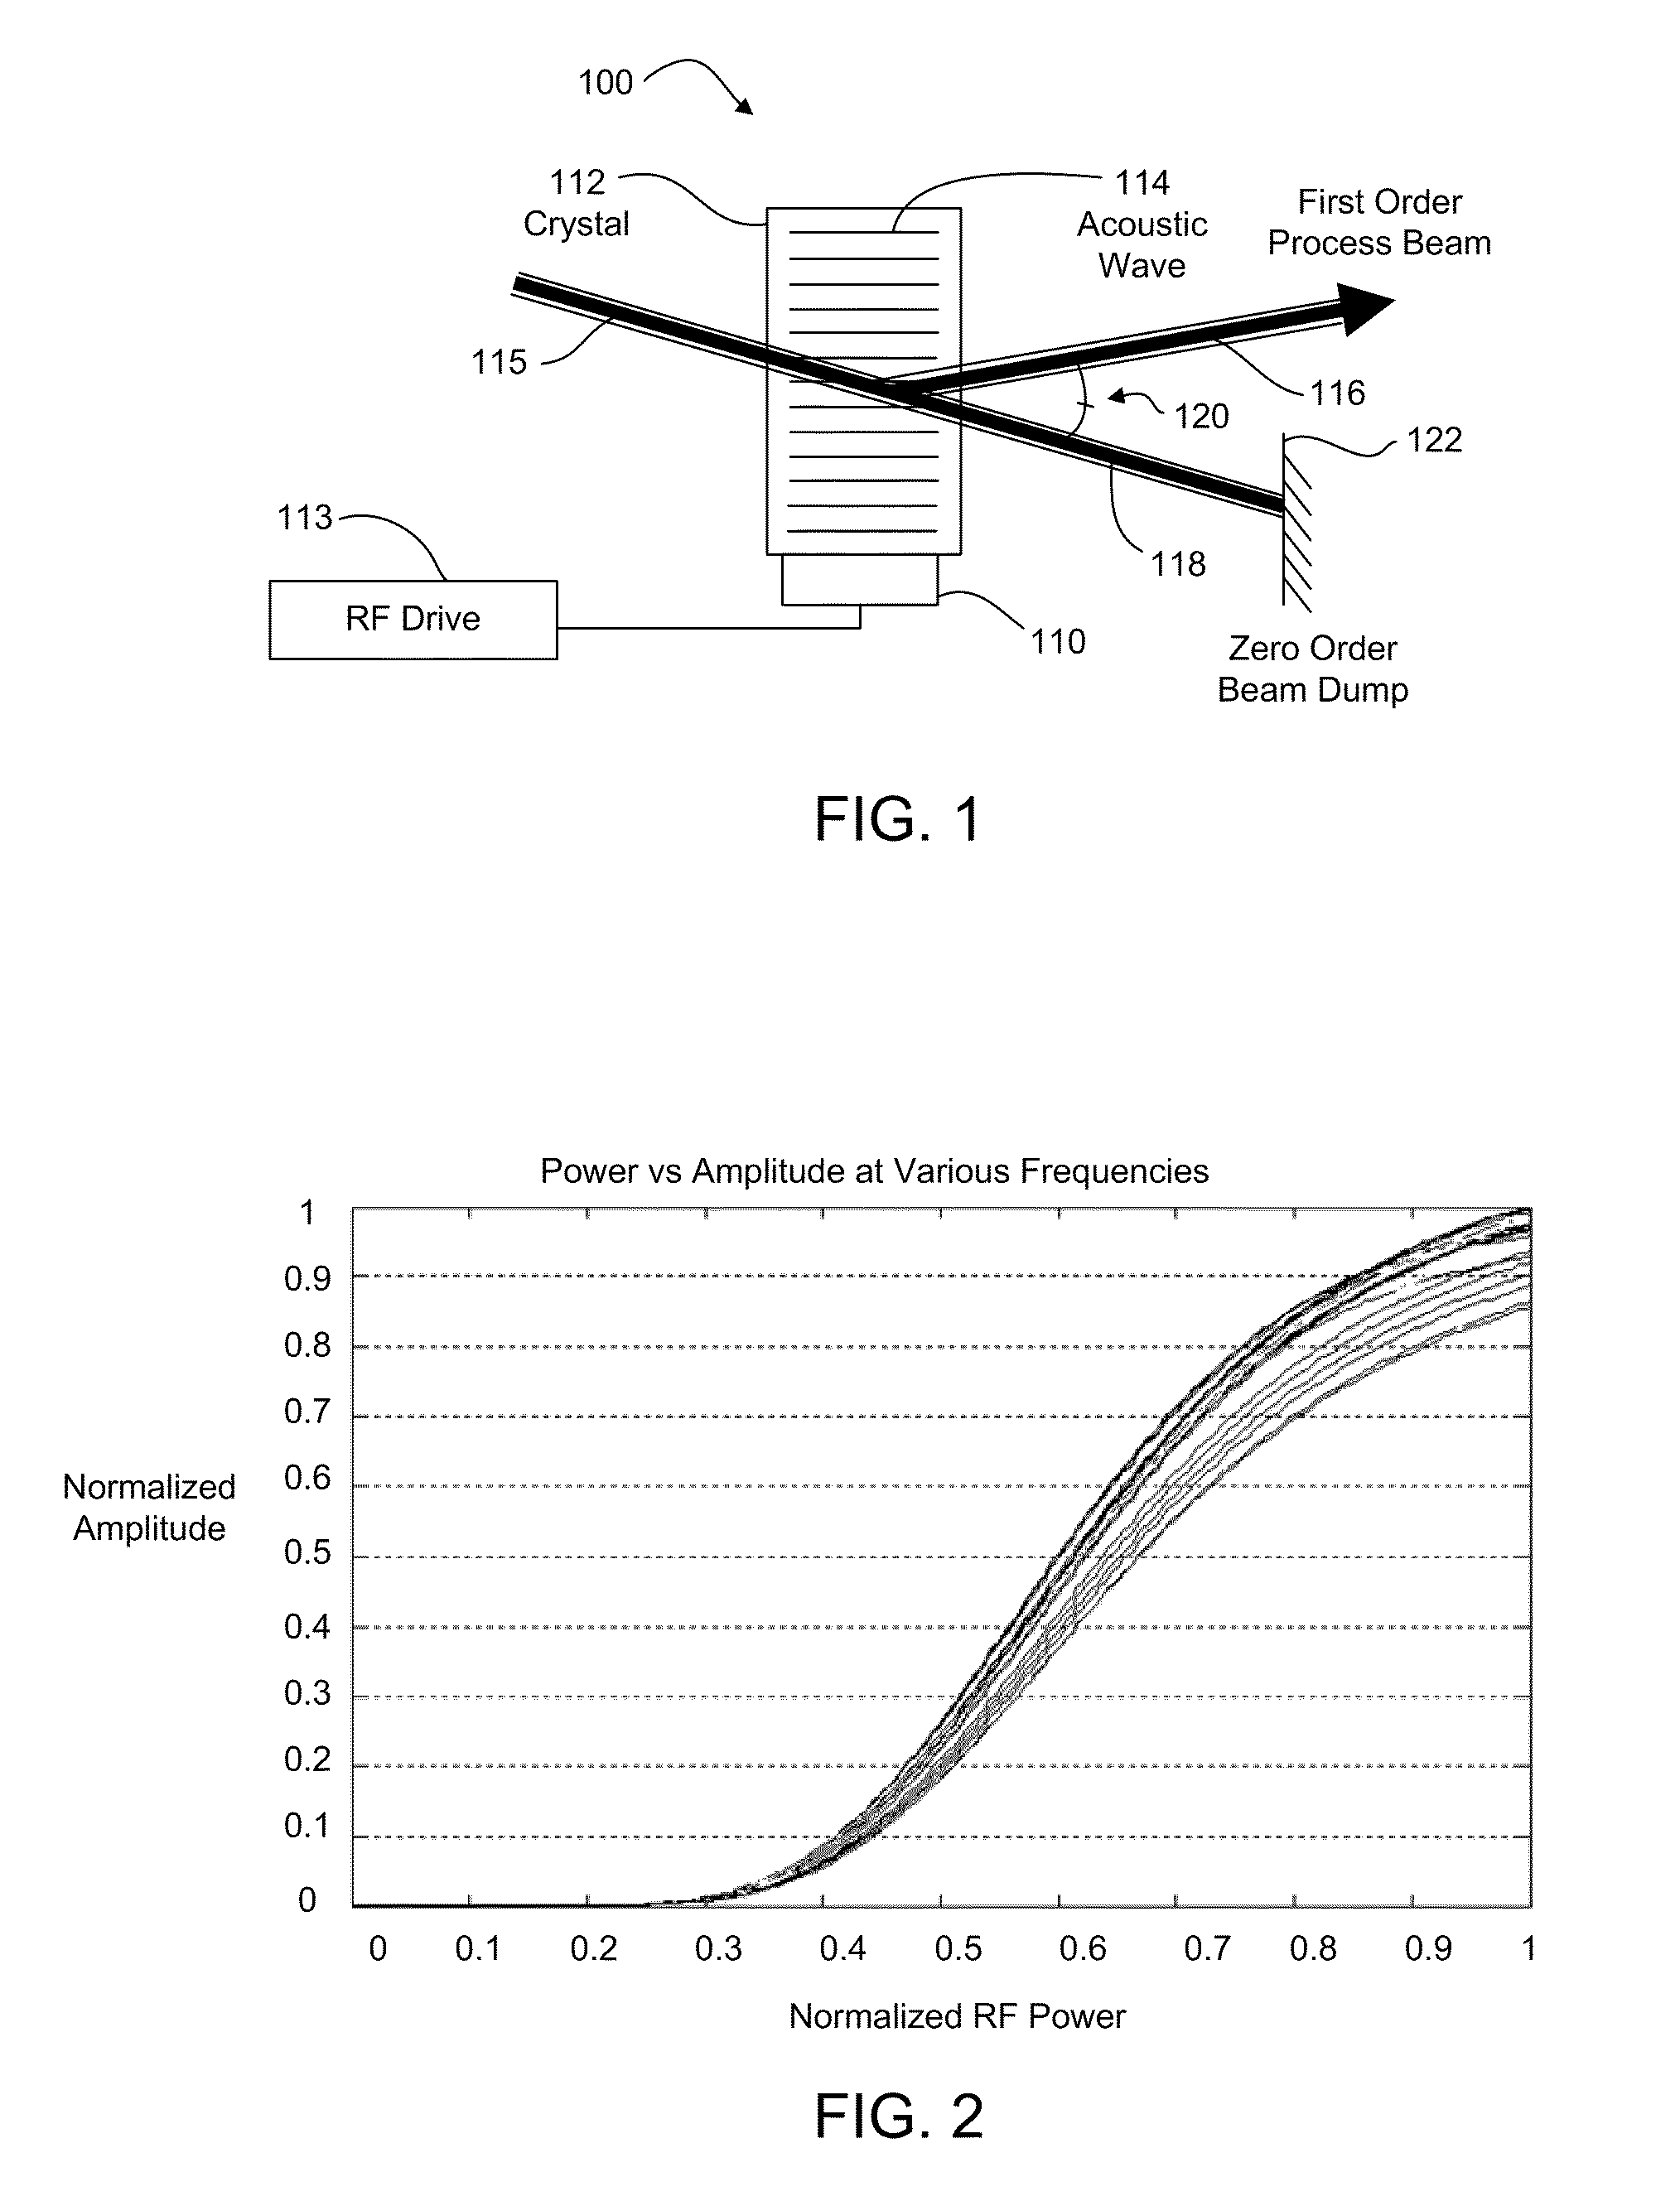 Laser processing systems using through-the-lens alignment of a laser beam with a target feature